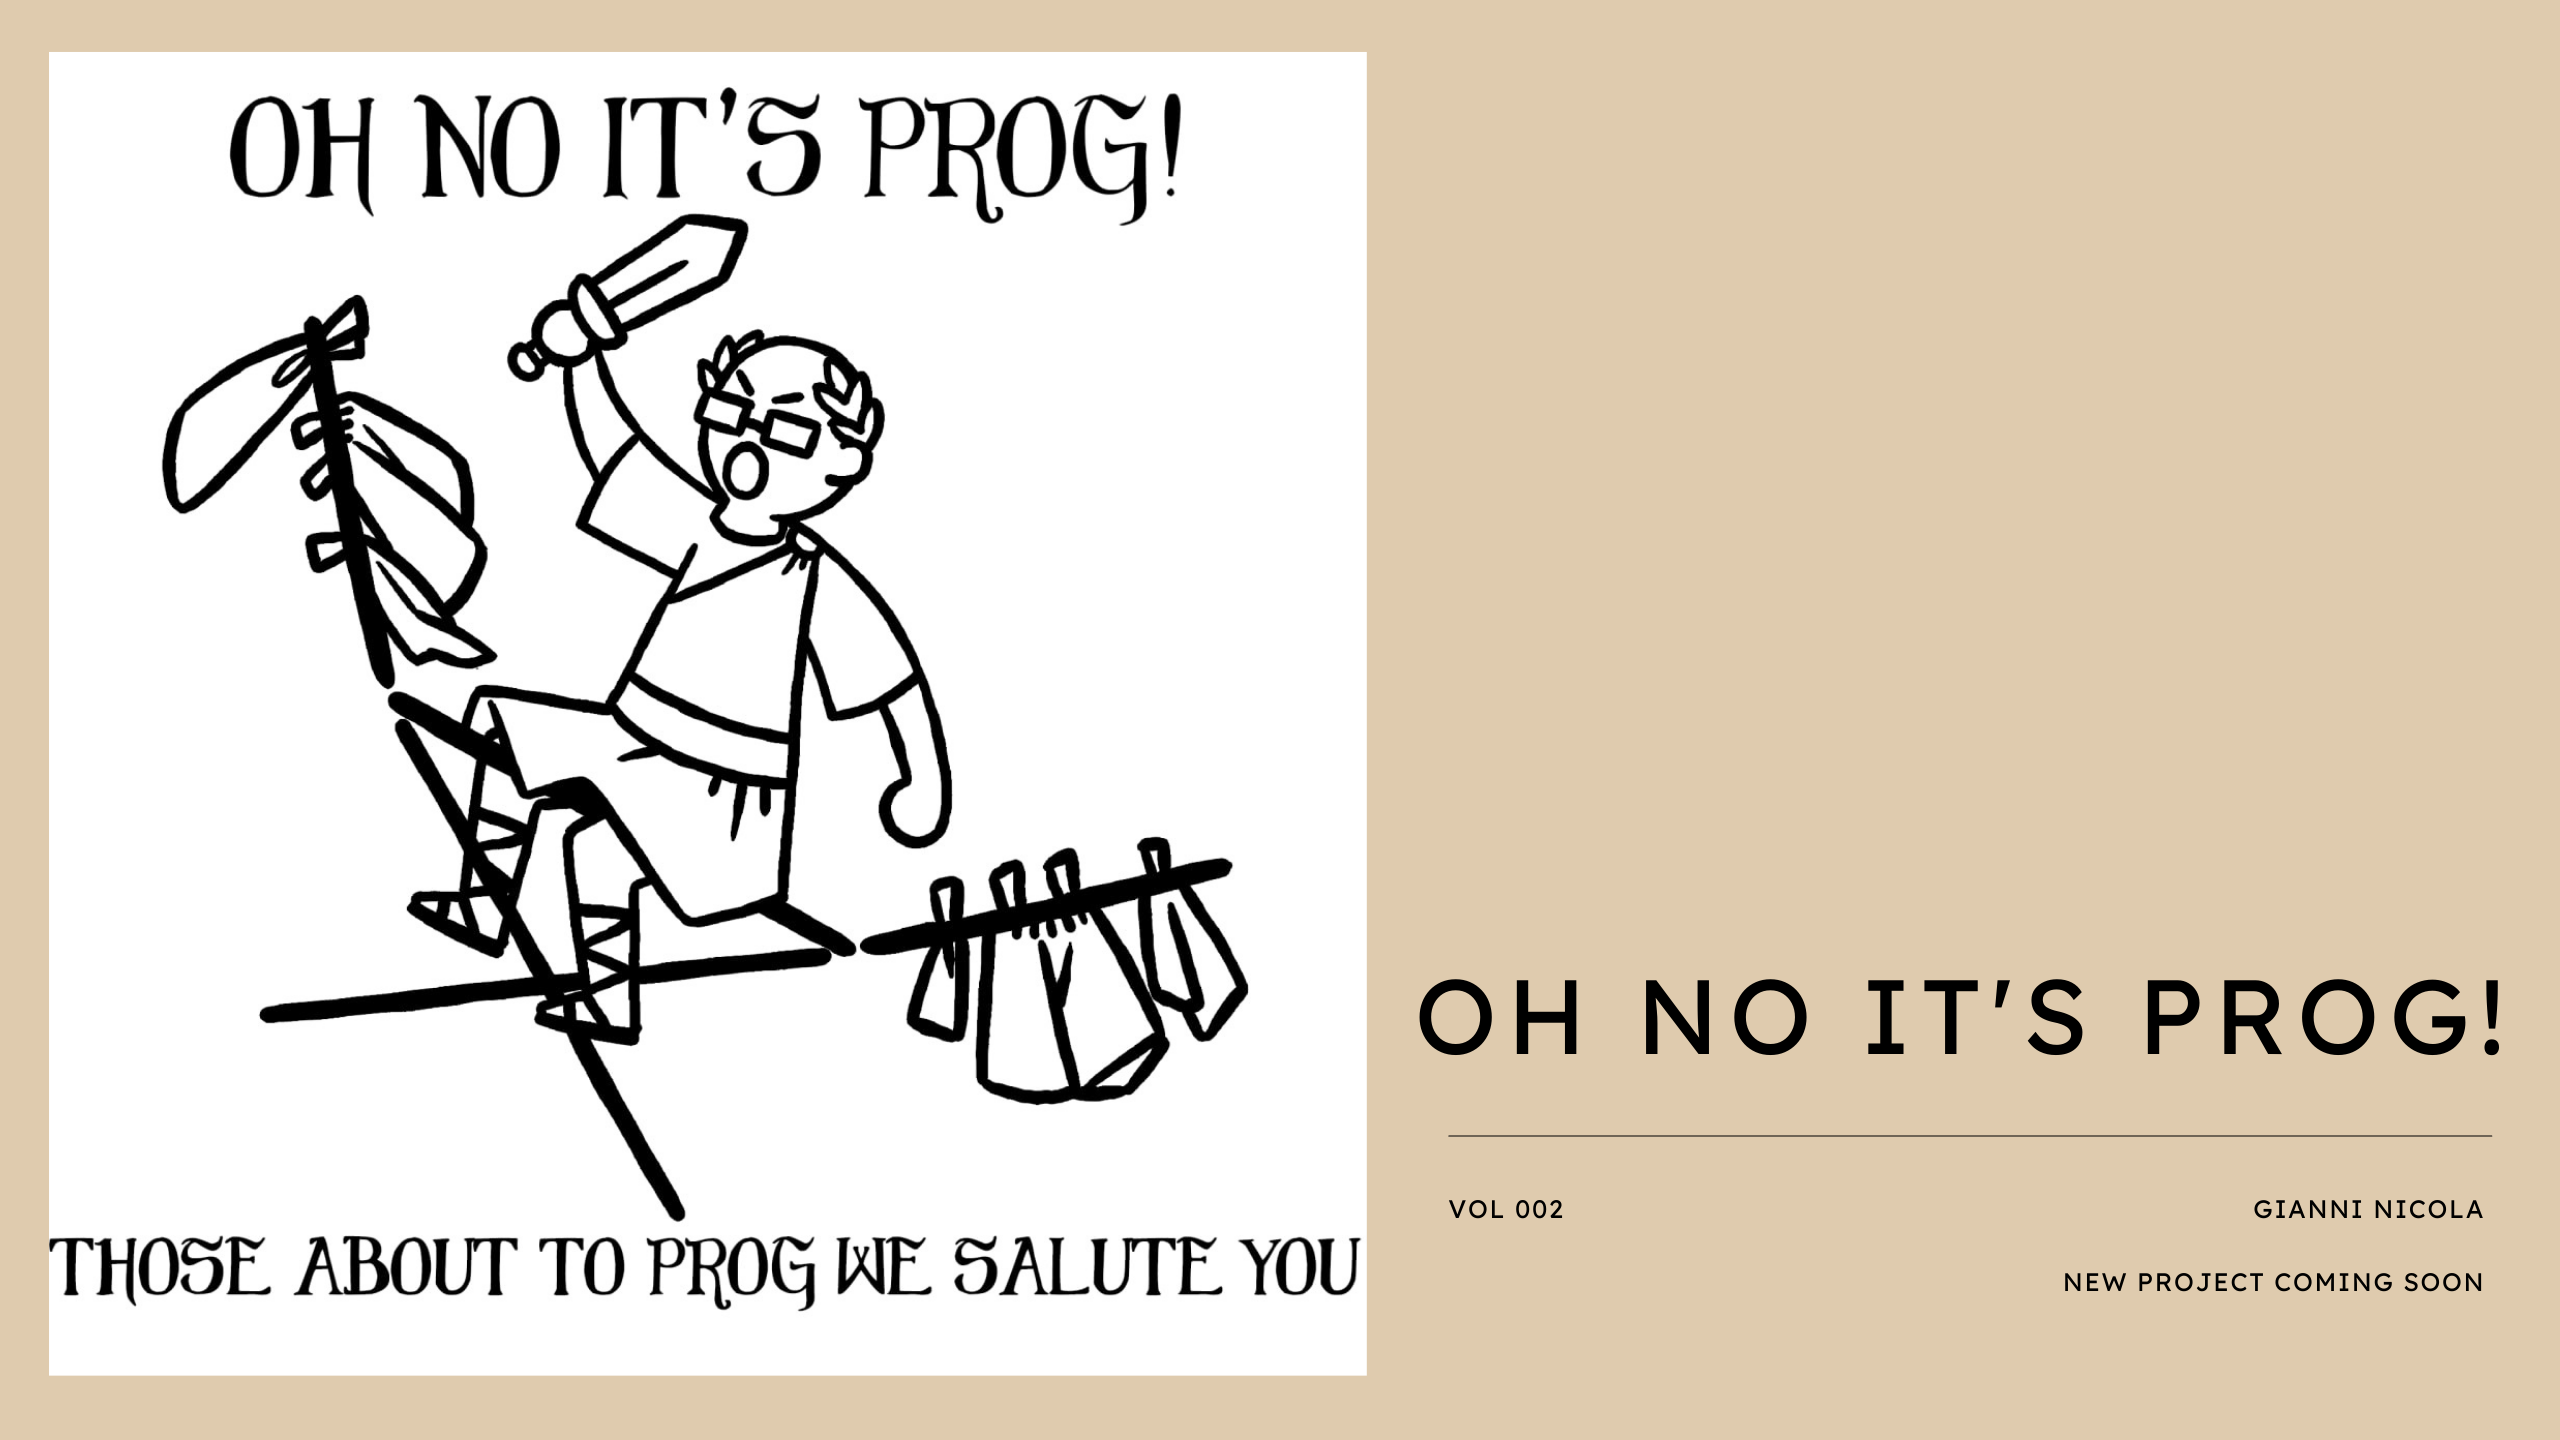 Oh no, It's Prog!
Those about to Prog, We salute You